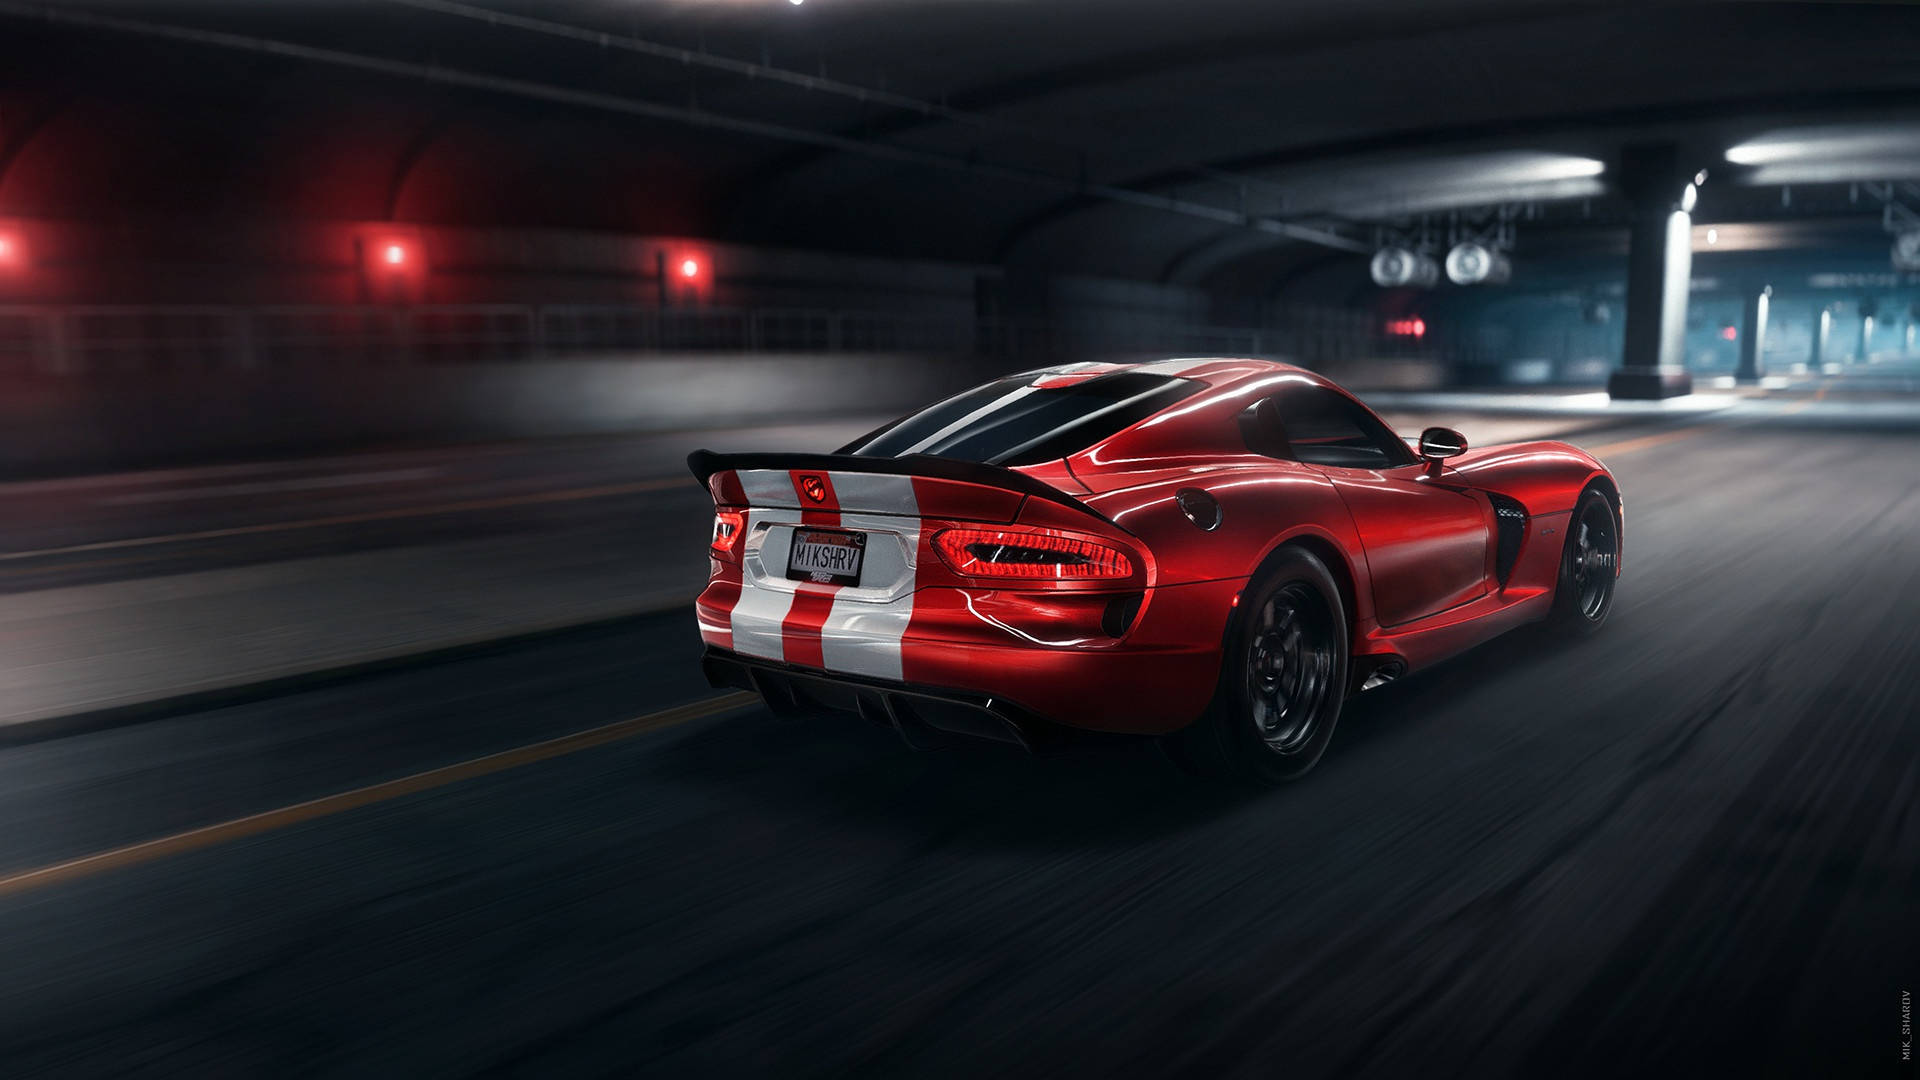 Need For Speed Payback Dodge Viper Srt Background